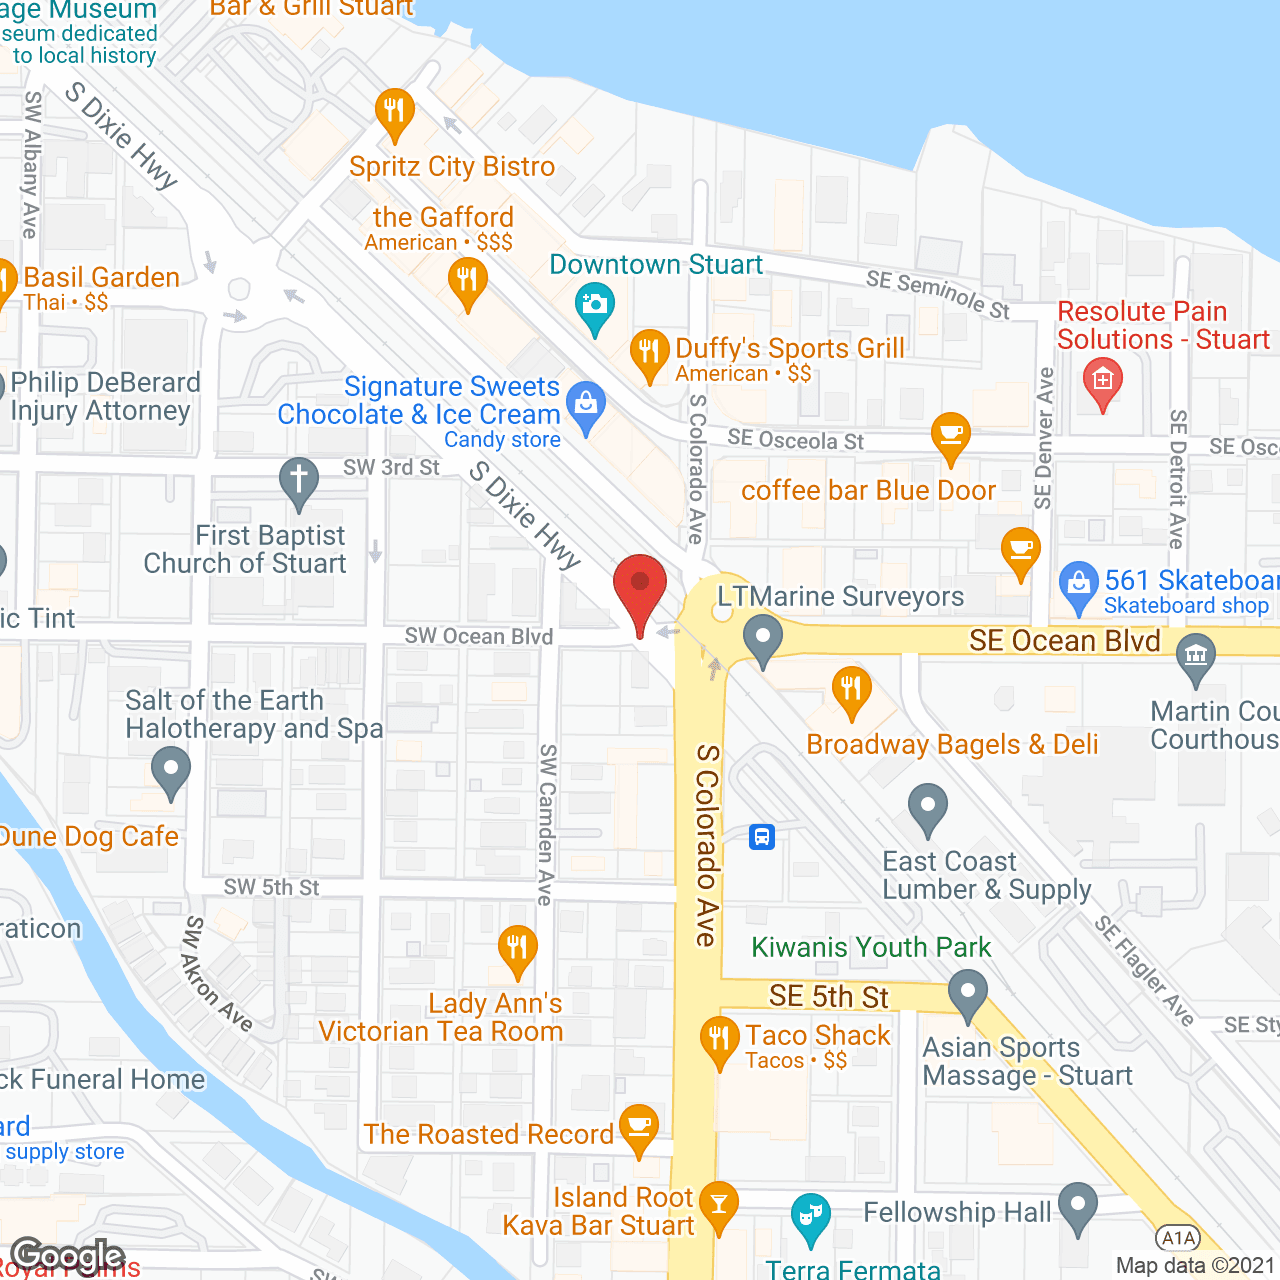 Absolute Care Services, Inc in google map